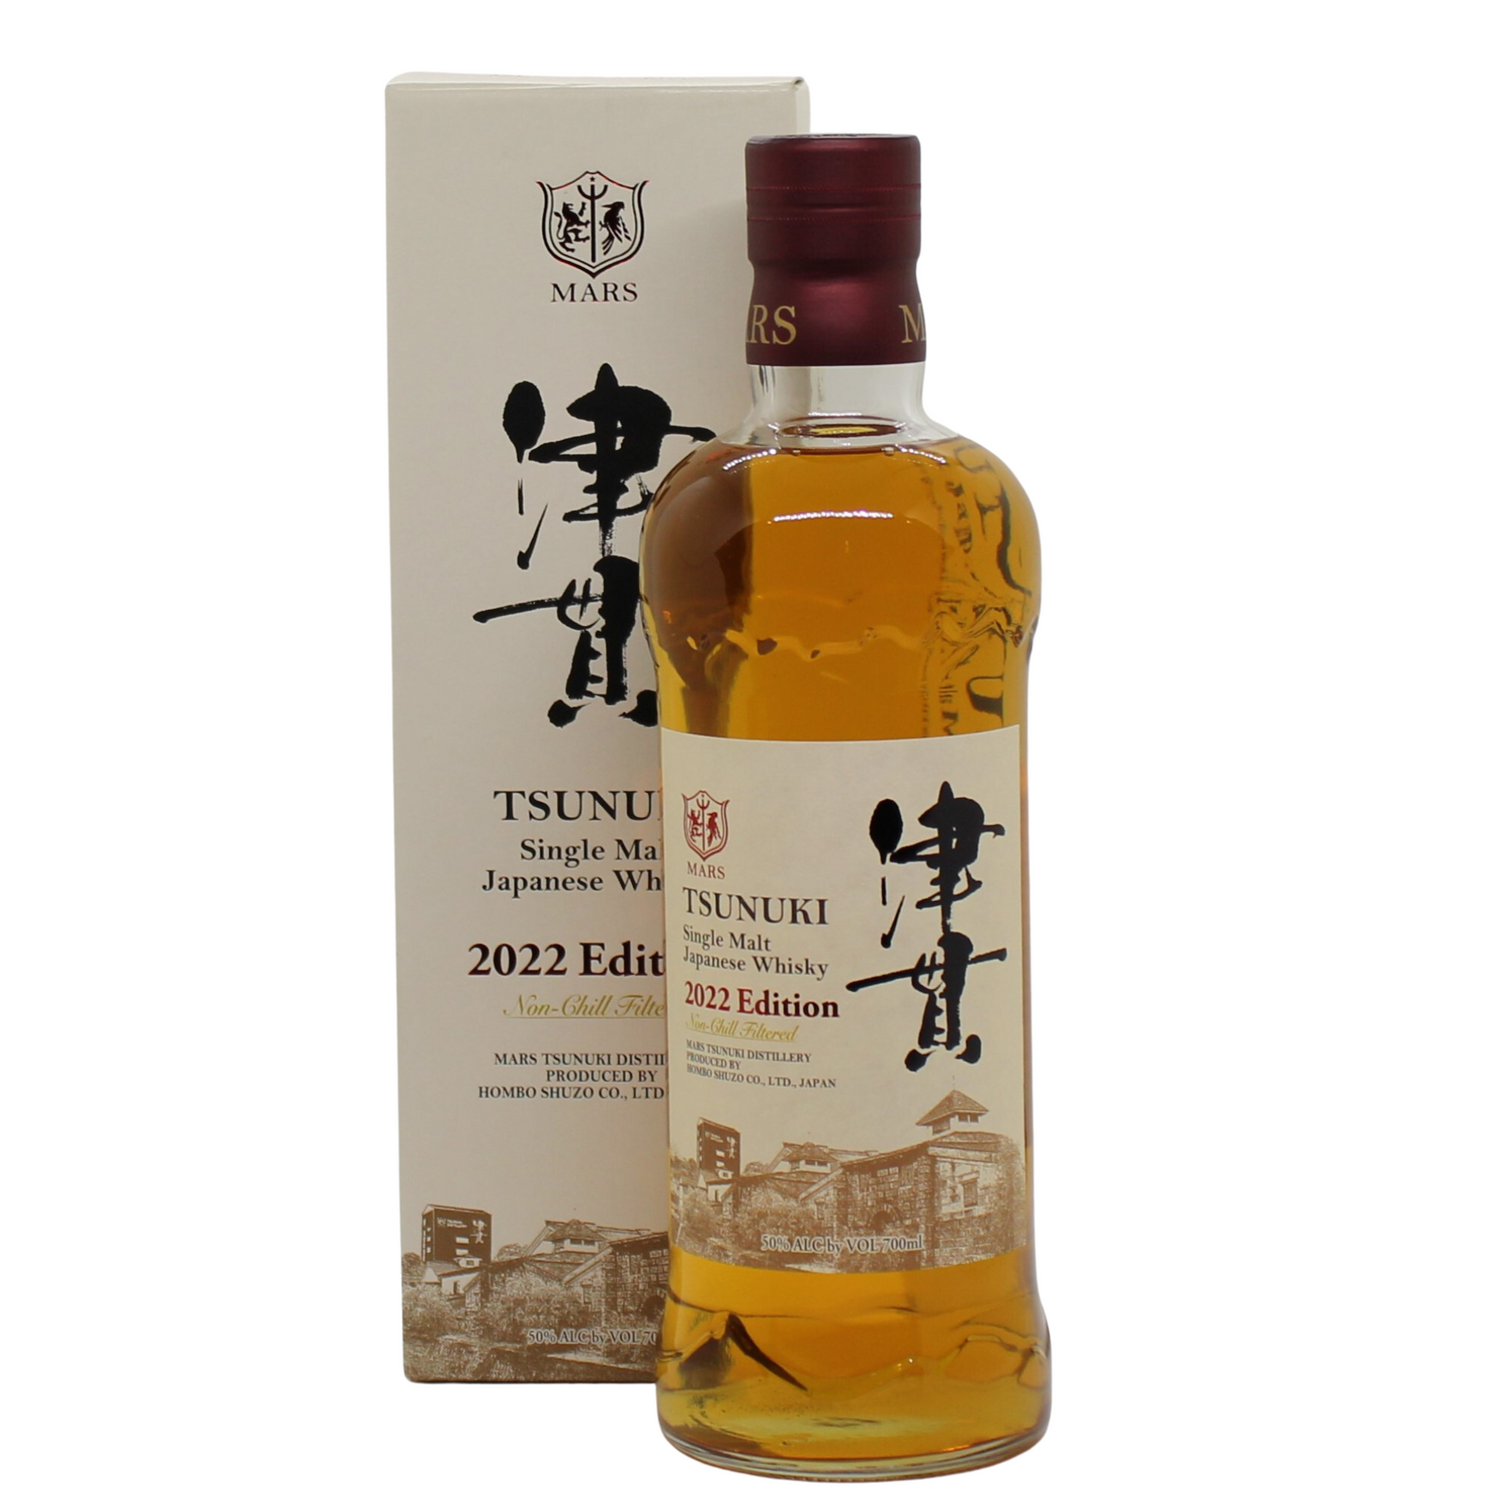 Mars Tsunuki distillery is the second distillery of the Hombo Shuzo Group, launched in 2016. This is the 2022 release by the Mars Tsunuki Distillery in Kagoshima with a release of 35,800 bottles. This is the 4th product release of single malt whisky distilled at Tsunuki (The Second Release of the Annual 'Year Edition').